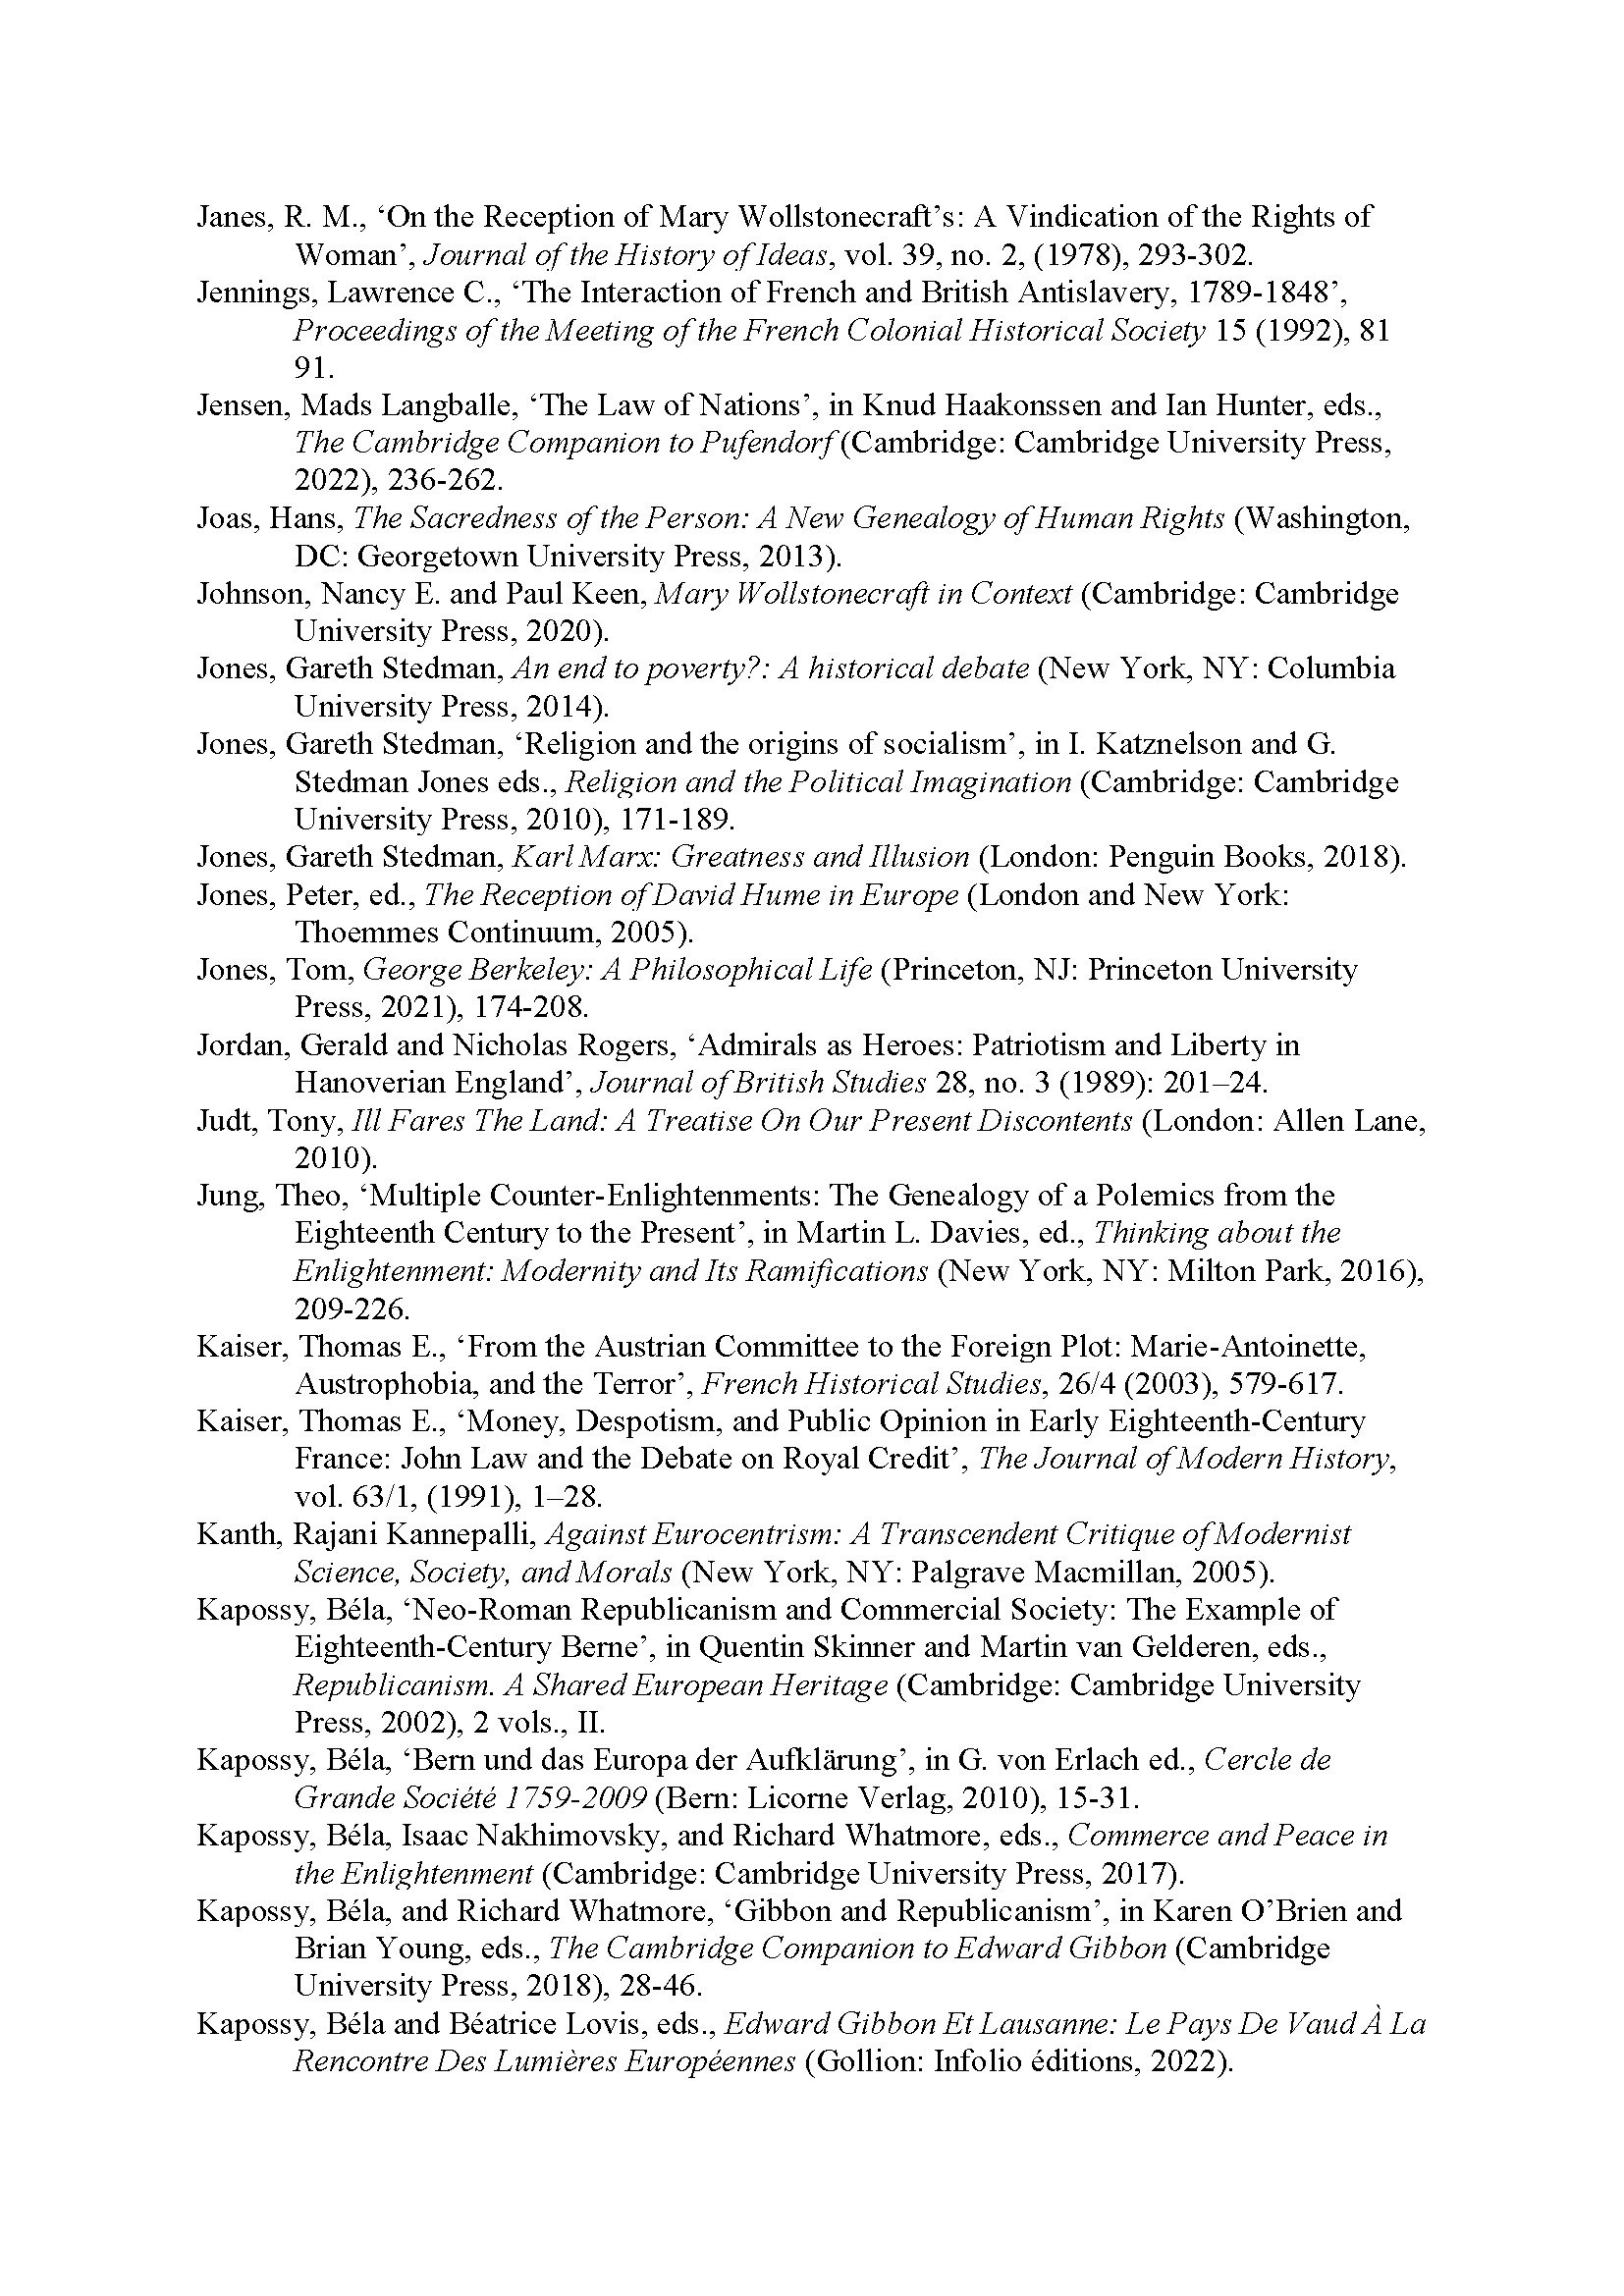 End of the Enlightment_Bibliography[25]_Page_24.jpg